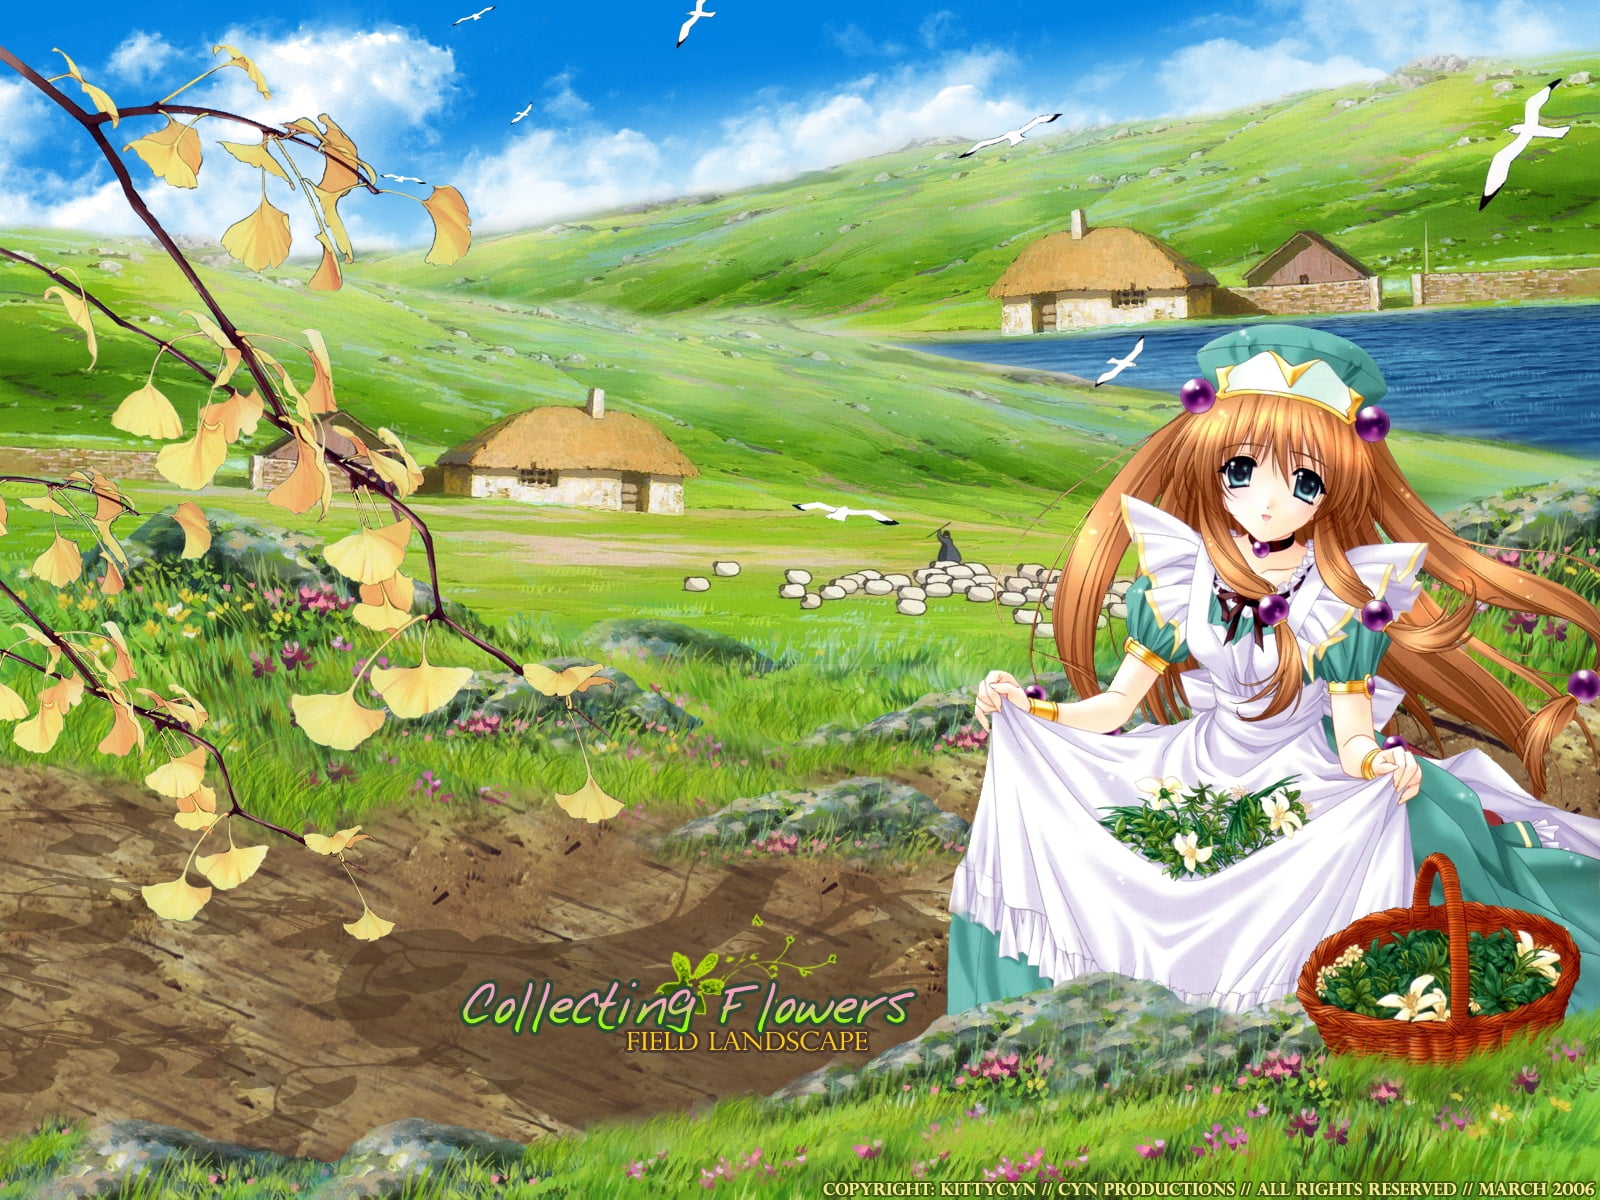 Collecting Flowers Field Bandscape wallpaper, aquarian age, girl